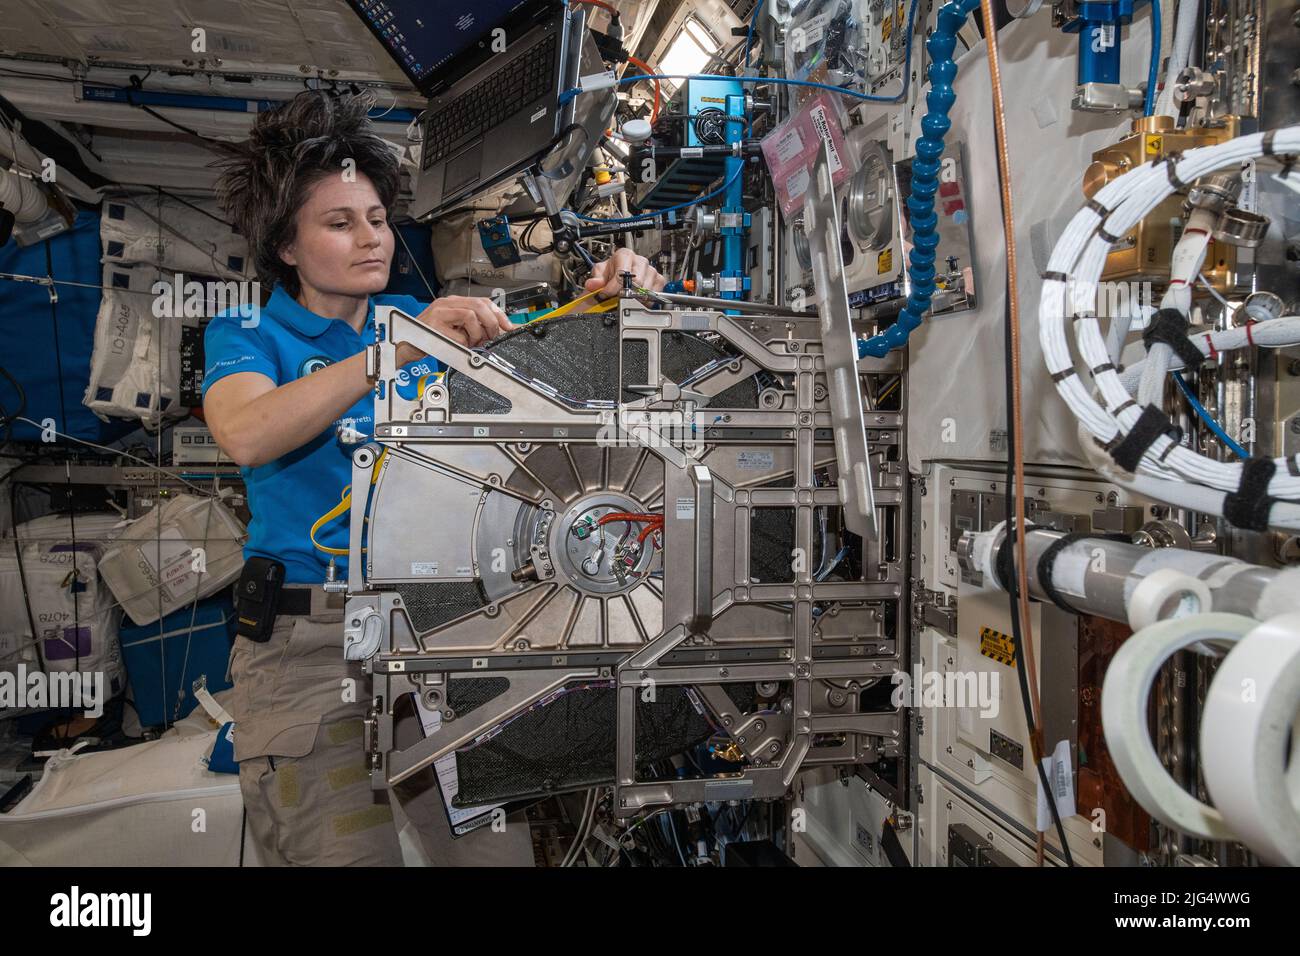 International Space Station Expedition 67 Flight Engineer Samantha Cristoforetti of the ESA, replaces centrifuge components inside the Columbus laboratory module BioLab, a research facility that studies the effects of space and radiation on single celled and multi-cellular organisms aboard the orbiting spacelab, June 23, 2022 in Earth Orbit. Stock Photo